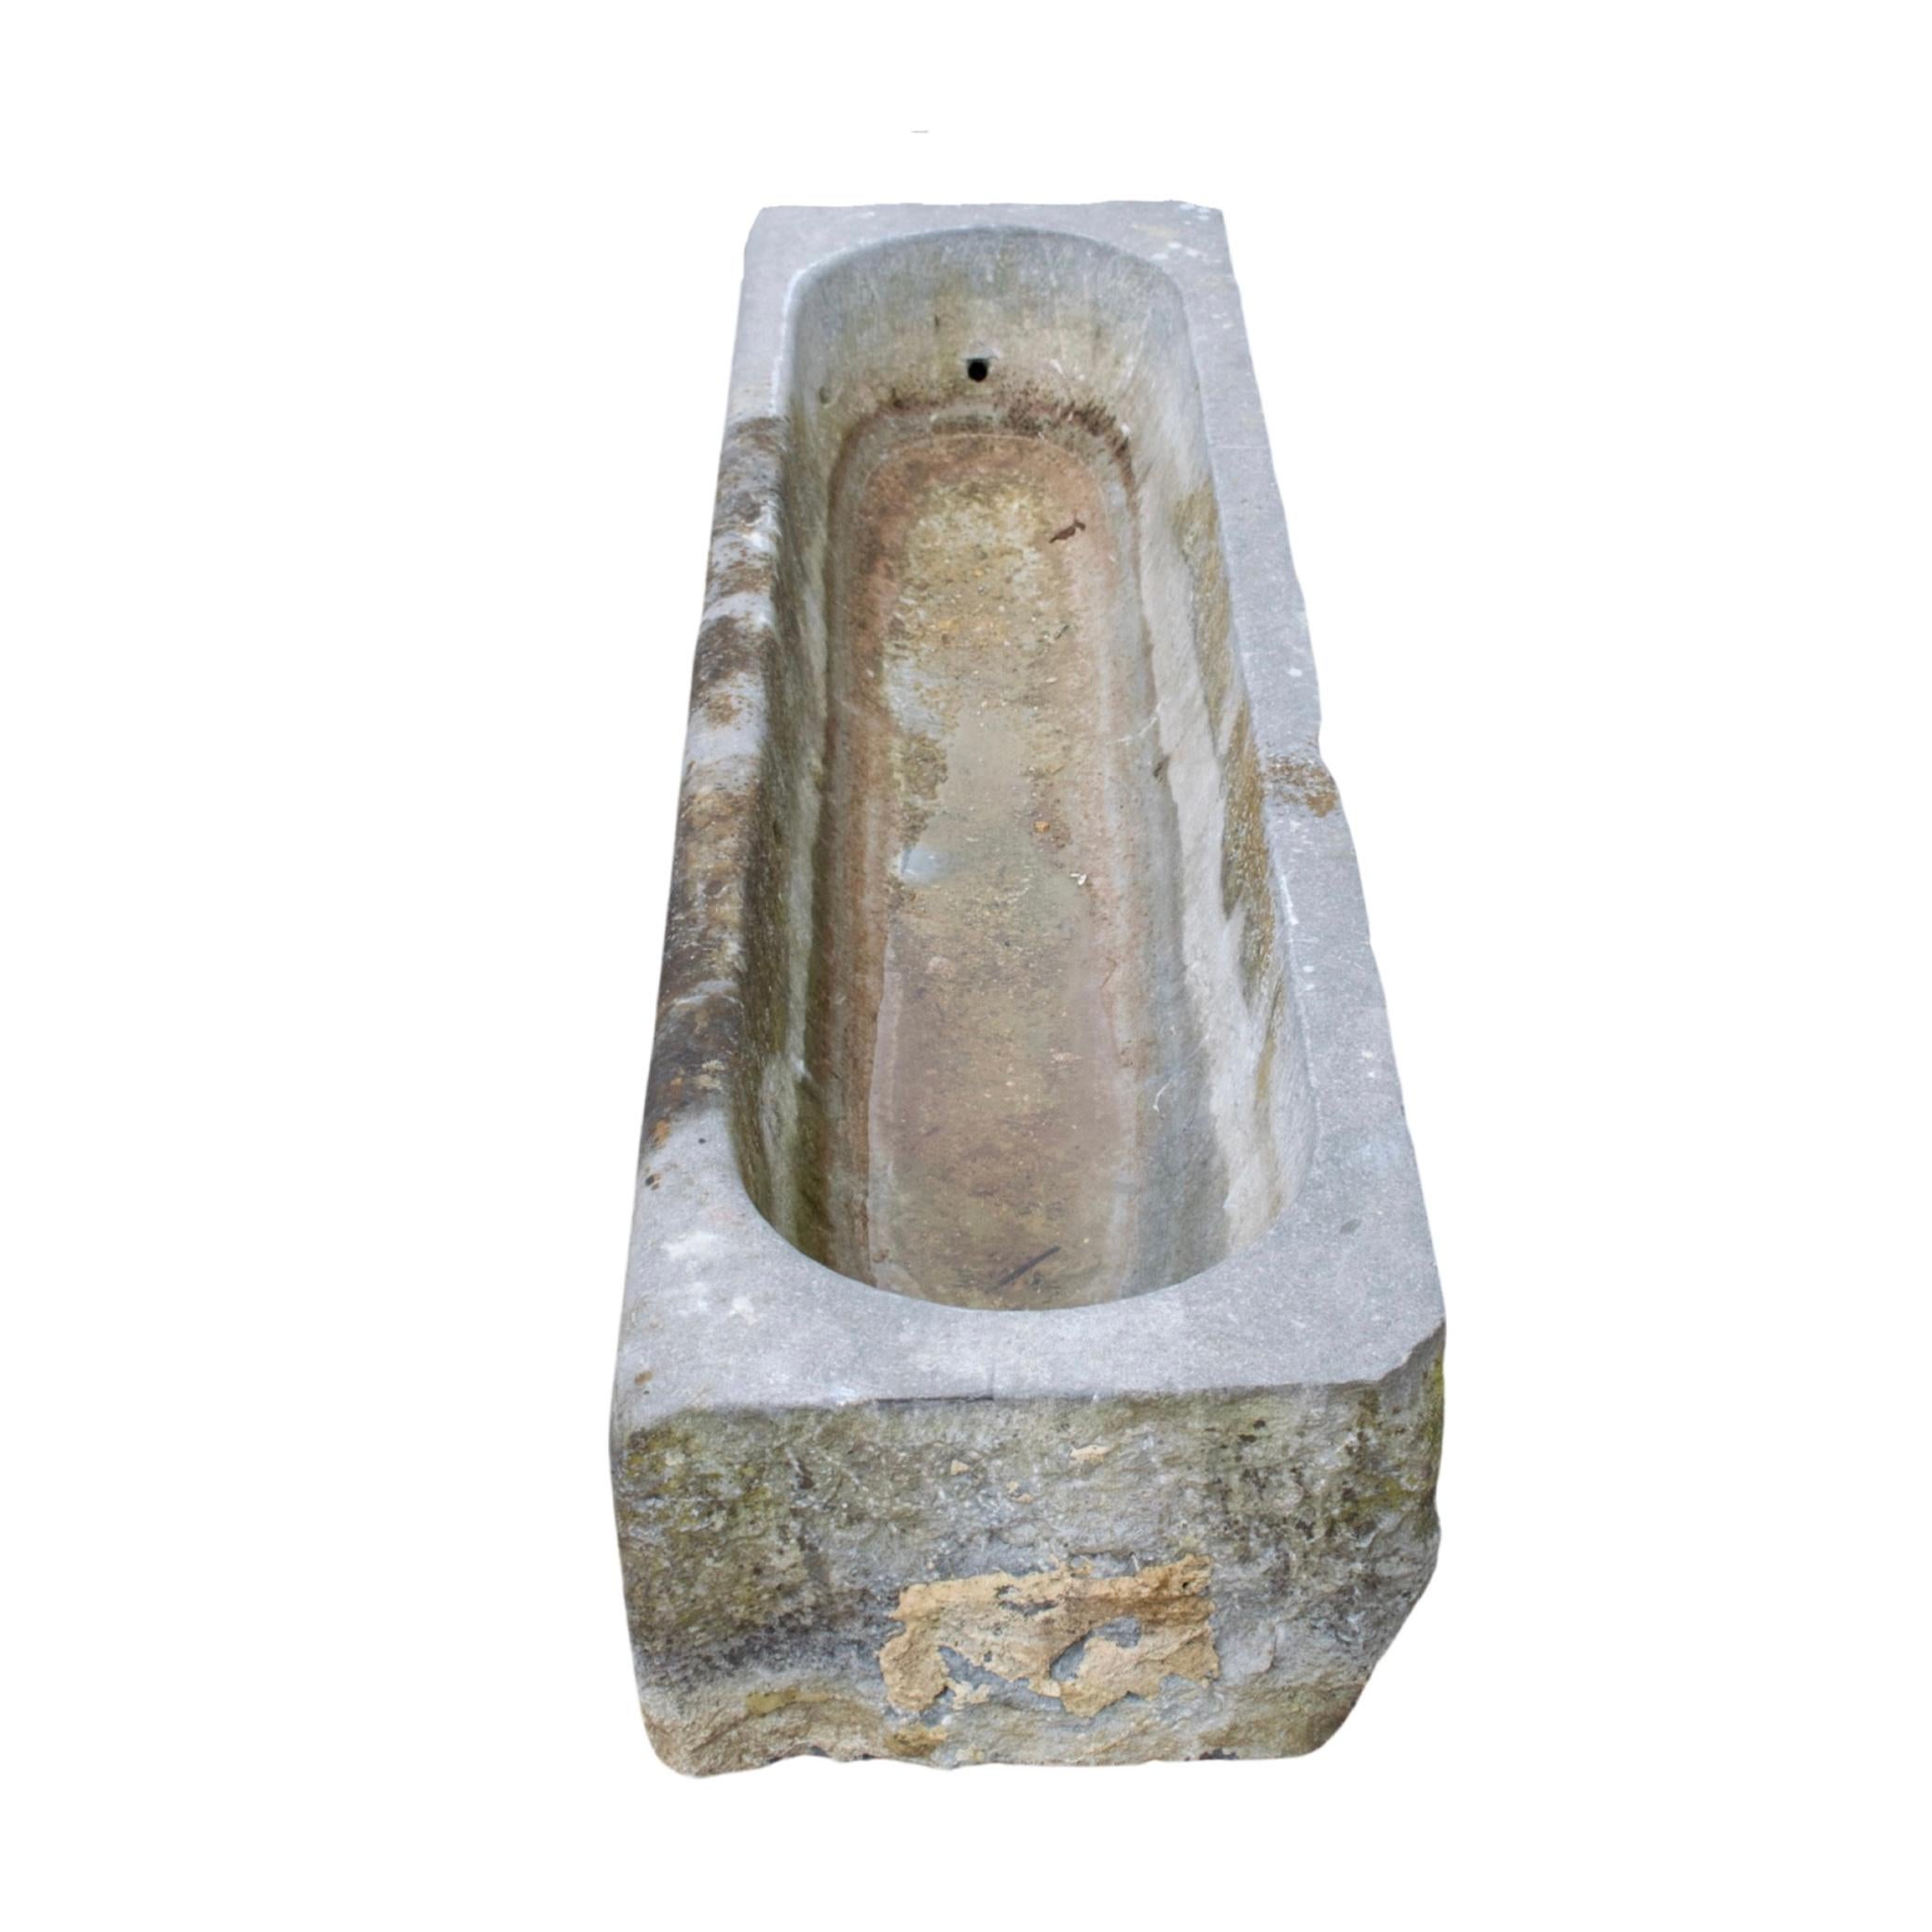 This Belgium Bluestone Trough is a unique piece crafted from 17th century Belgium bluestone. Its one basin is hand-carved from the original stone, providing durability and authenticity. The classic Belgian bluestone adds a sense of timeless style to